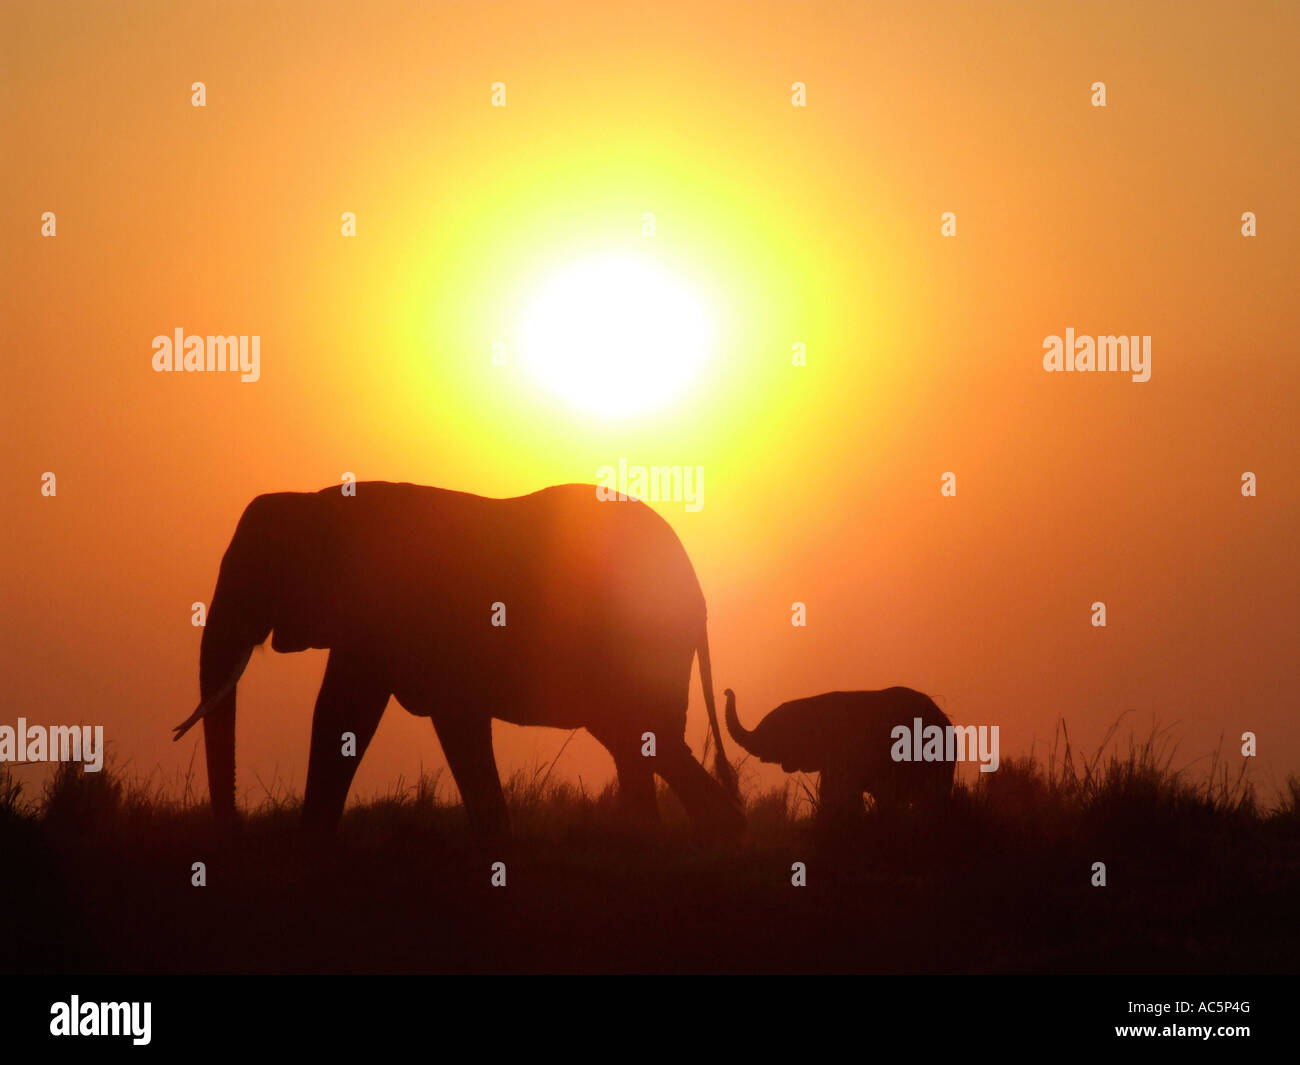 Silhouette of elephants at sunset Stock Photo